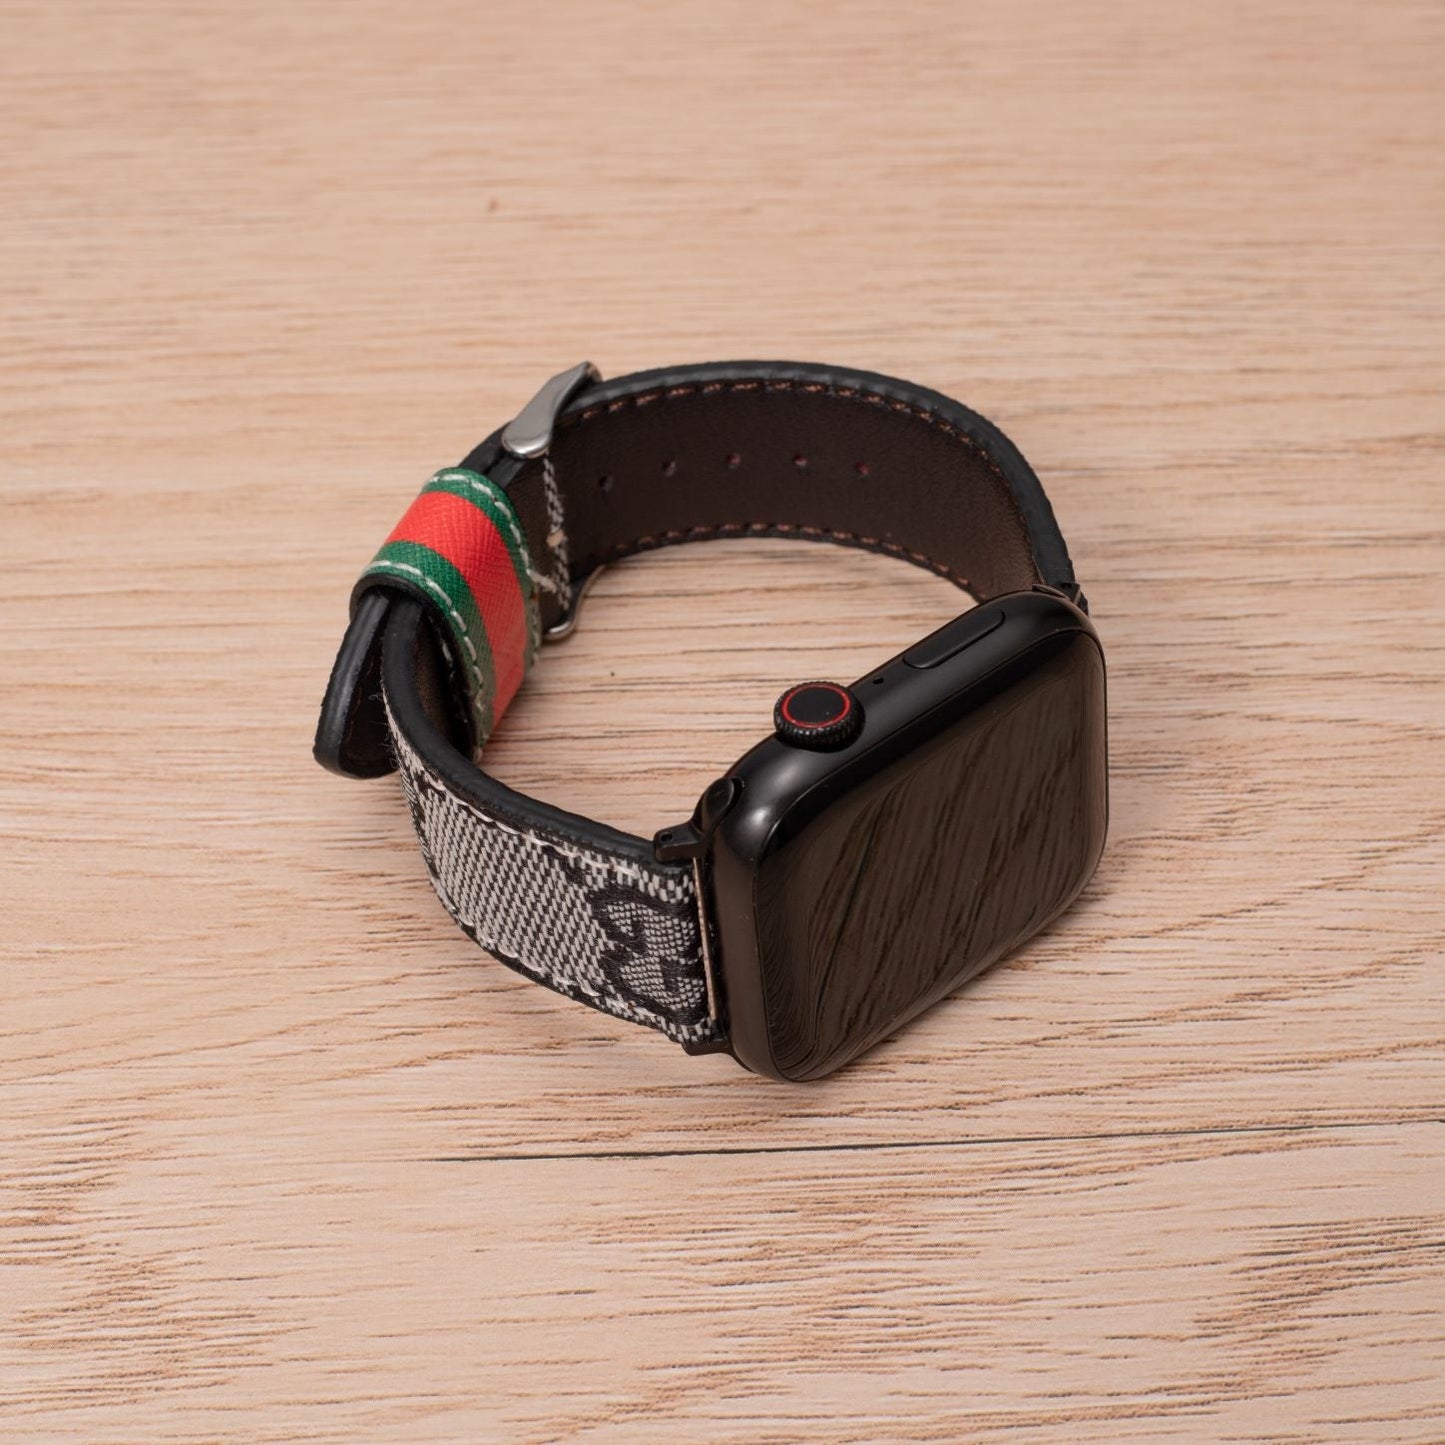 Luxury Leather Strap for Apple Watch